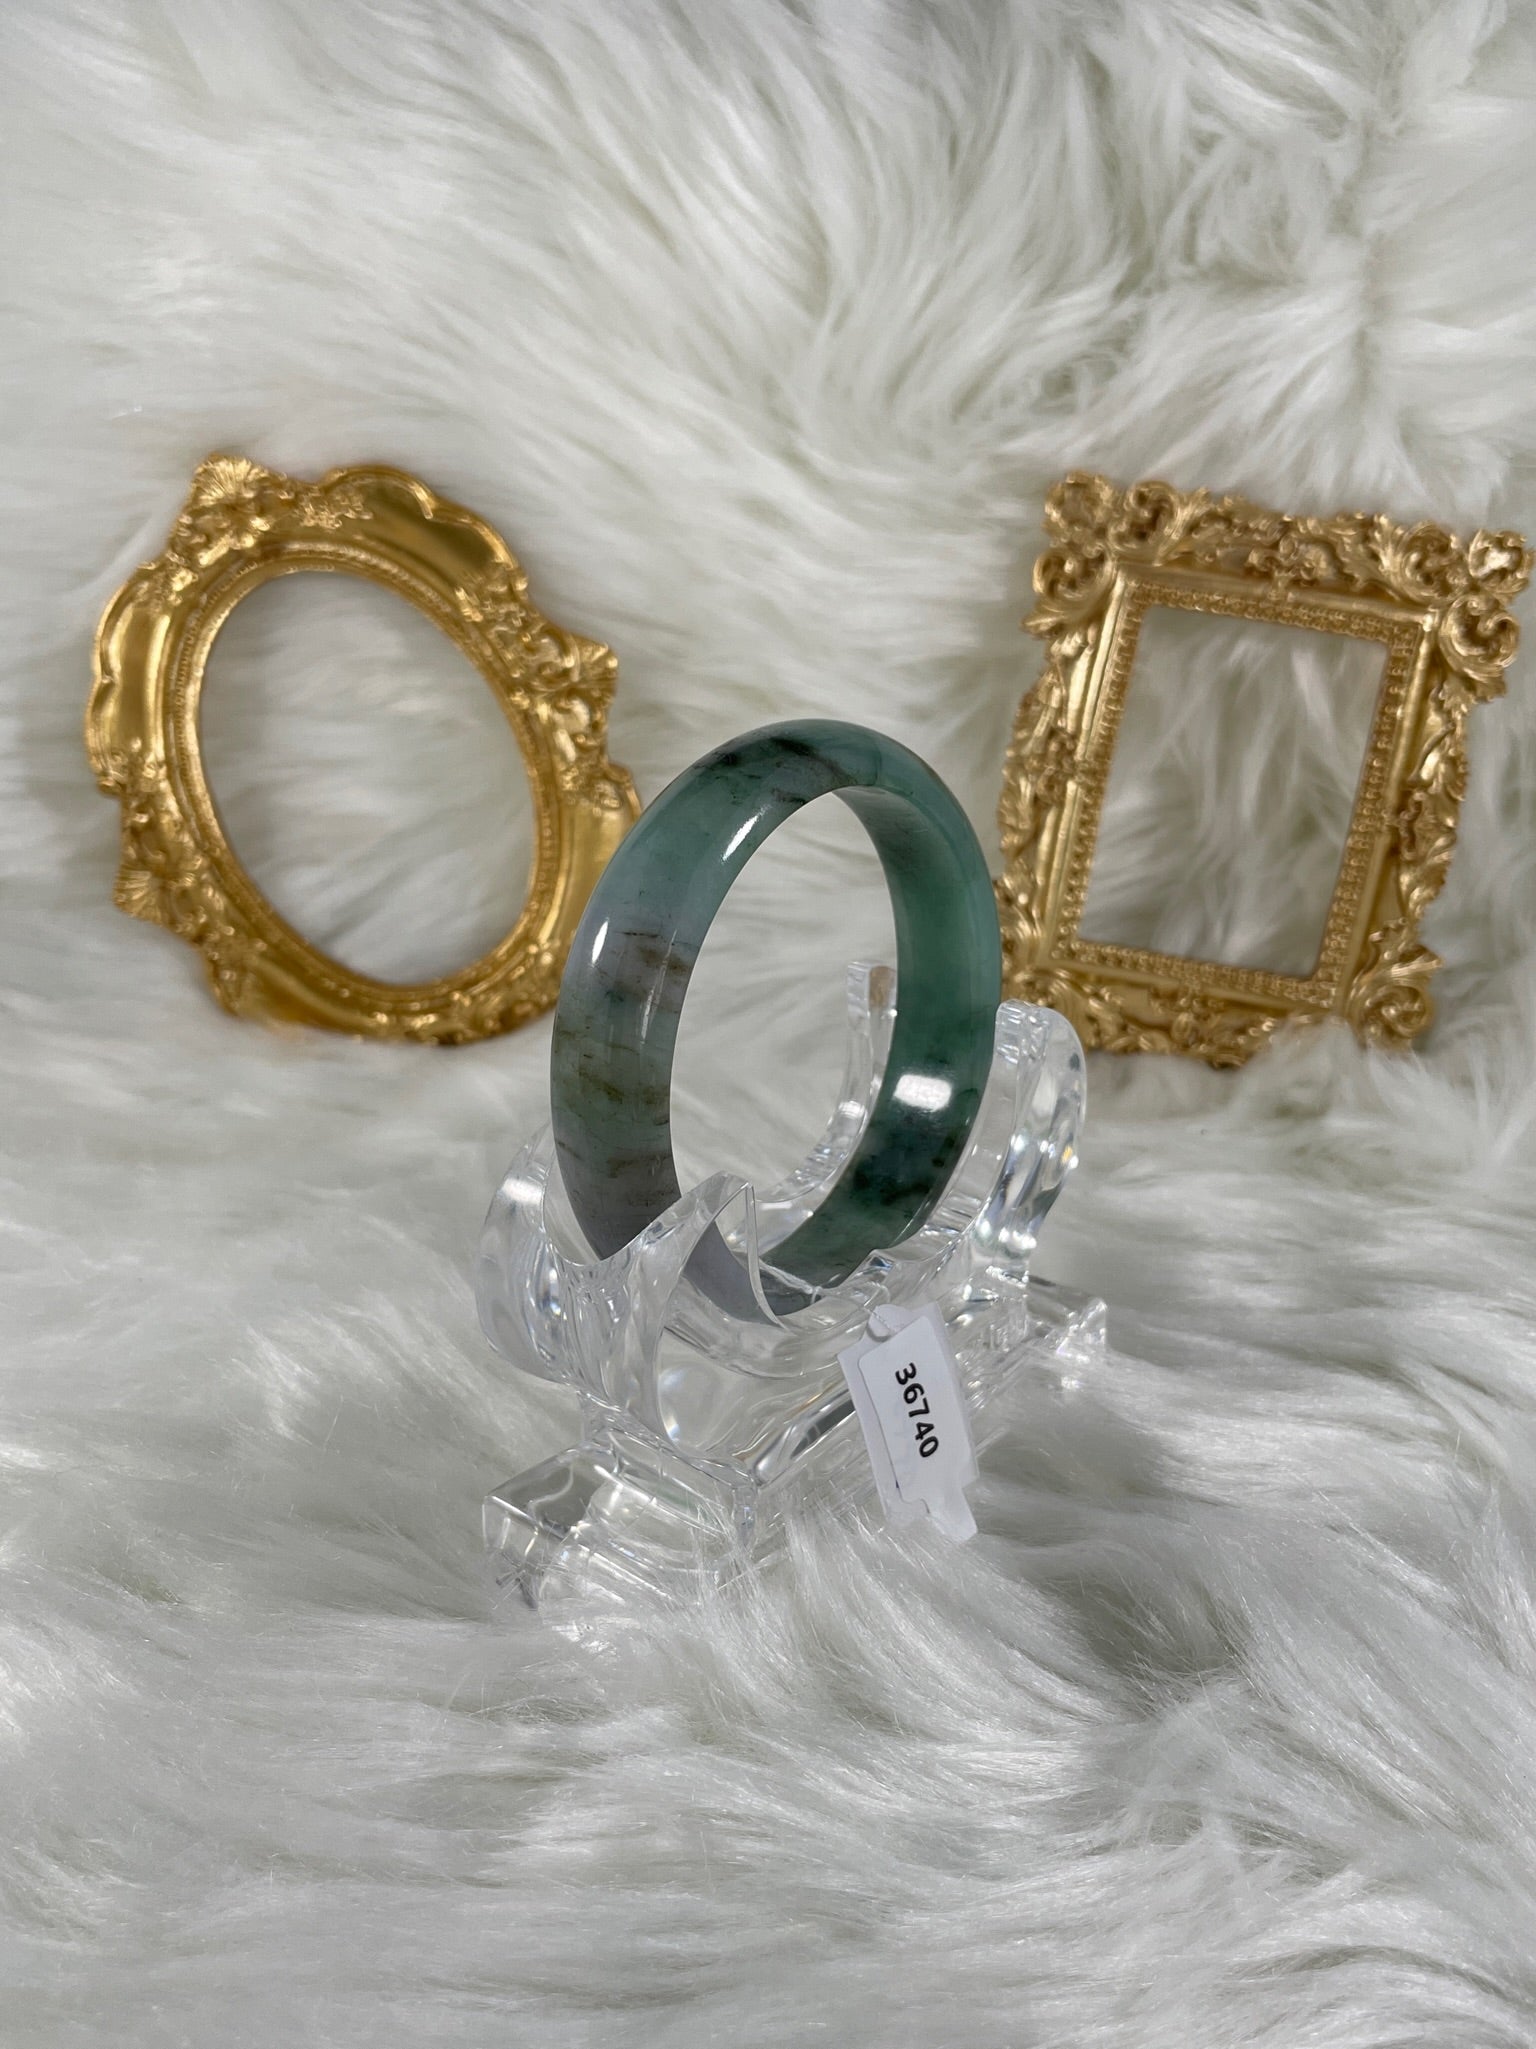 Grade A Natural Jade Bangle with certificate #36740